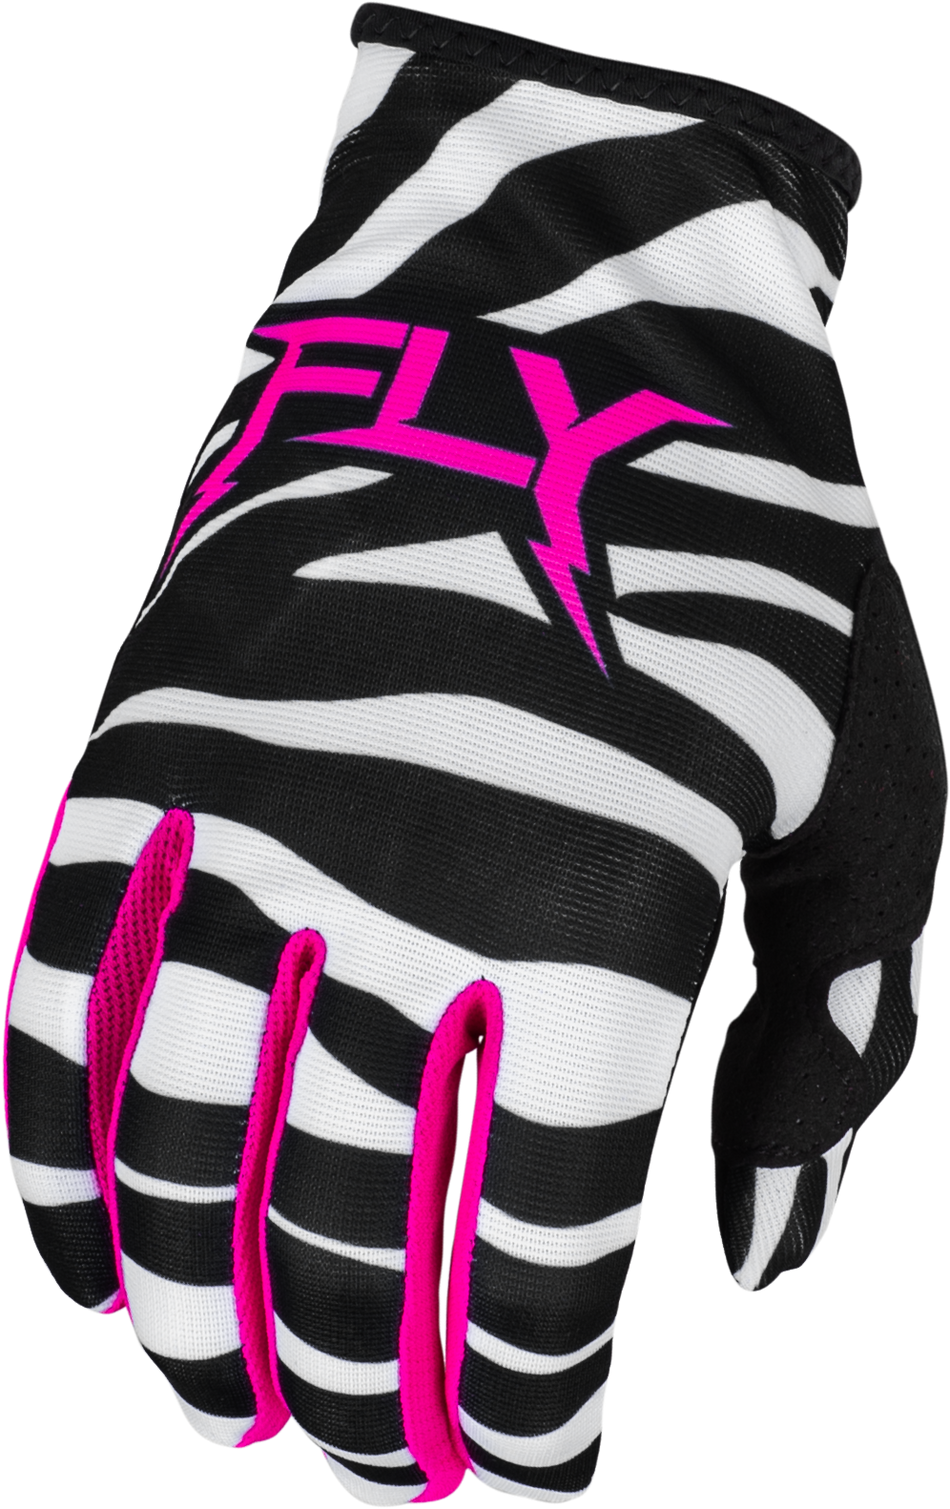 FLY RACING Youth Lite Uncaged Gloves Black/White/Neon Pink Yl 377-741YL